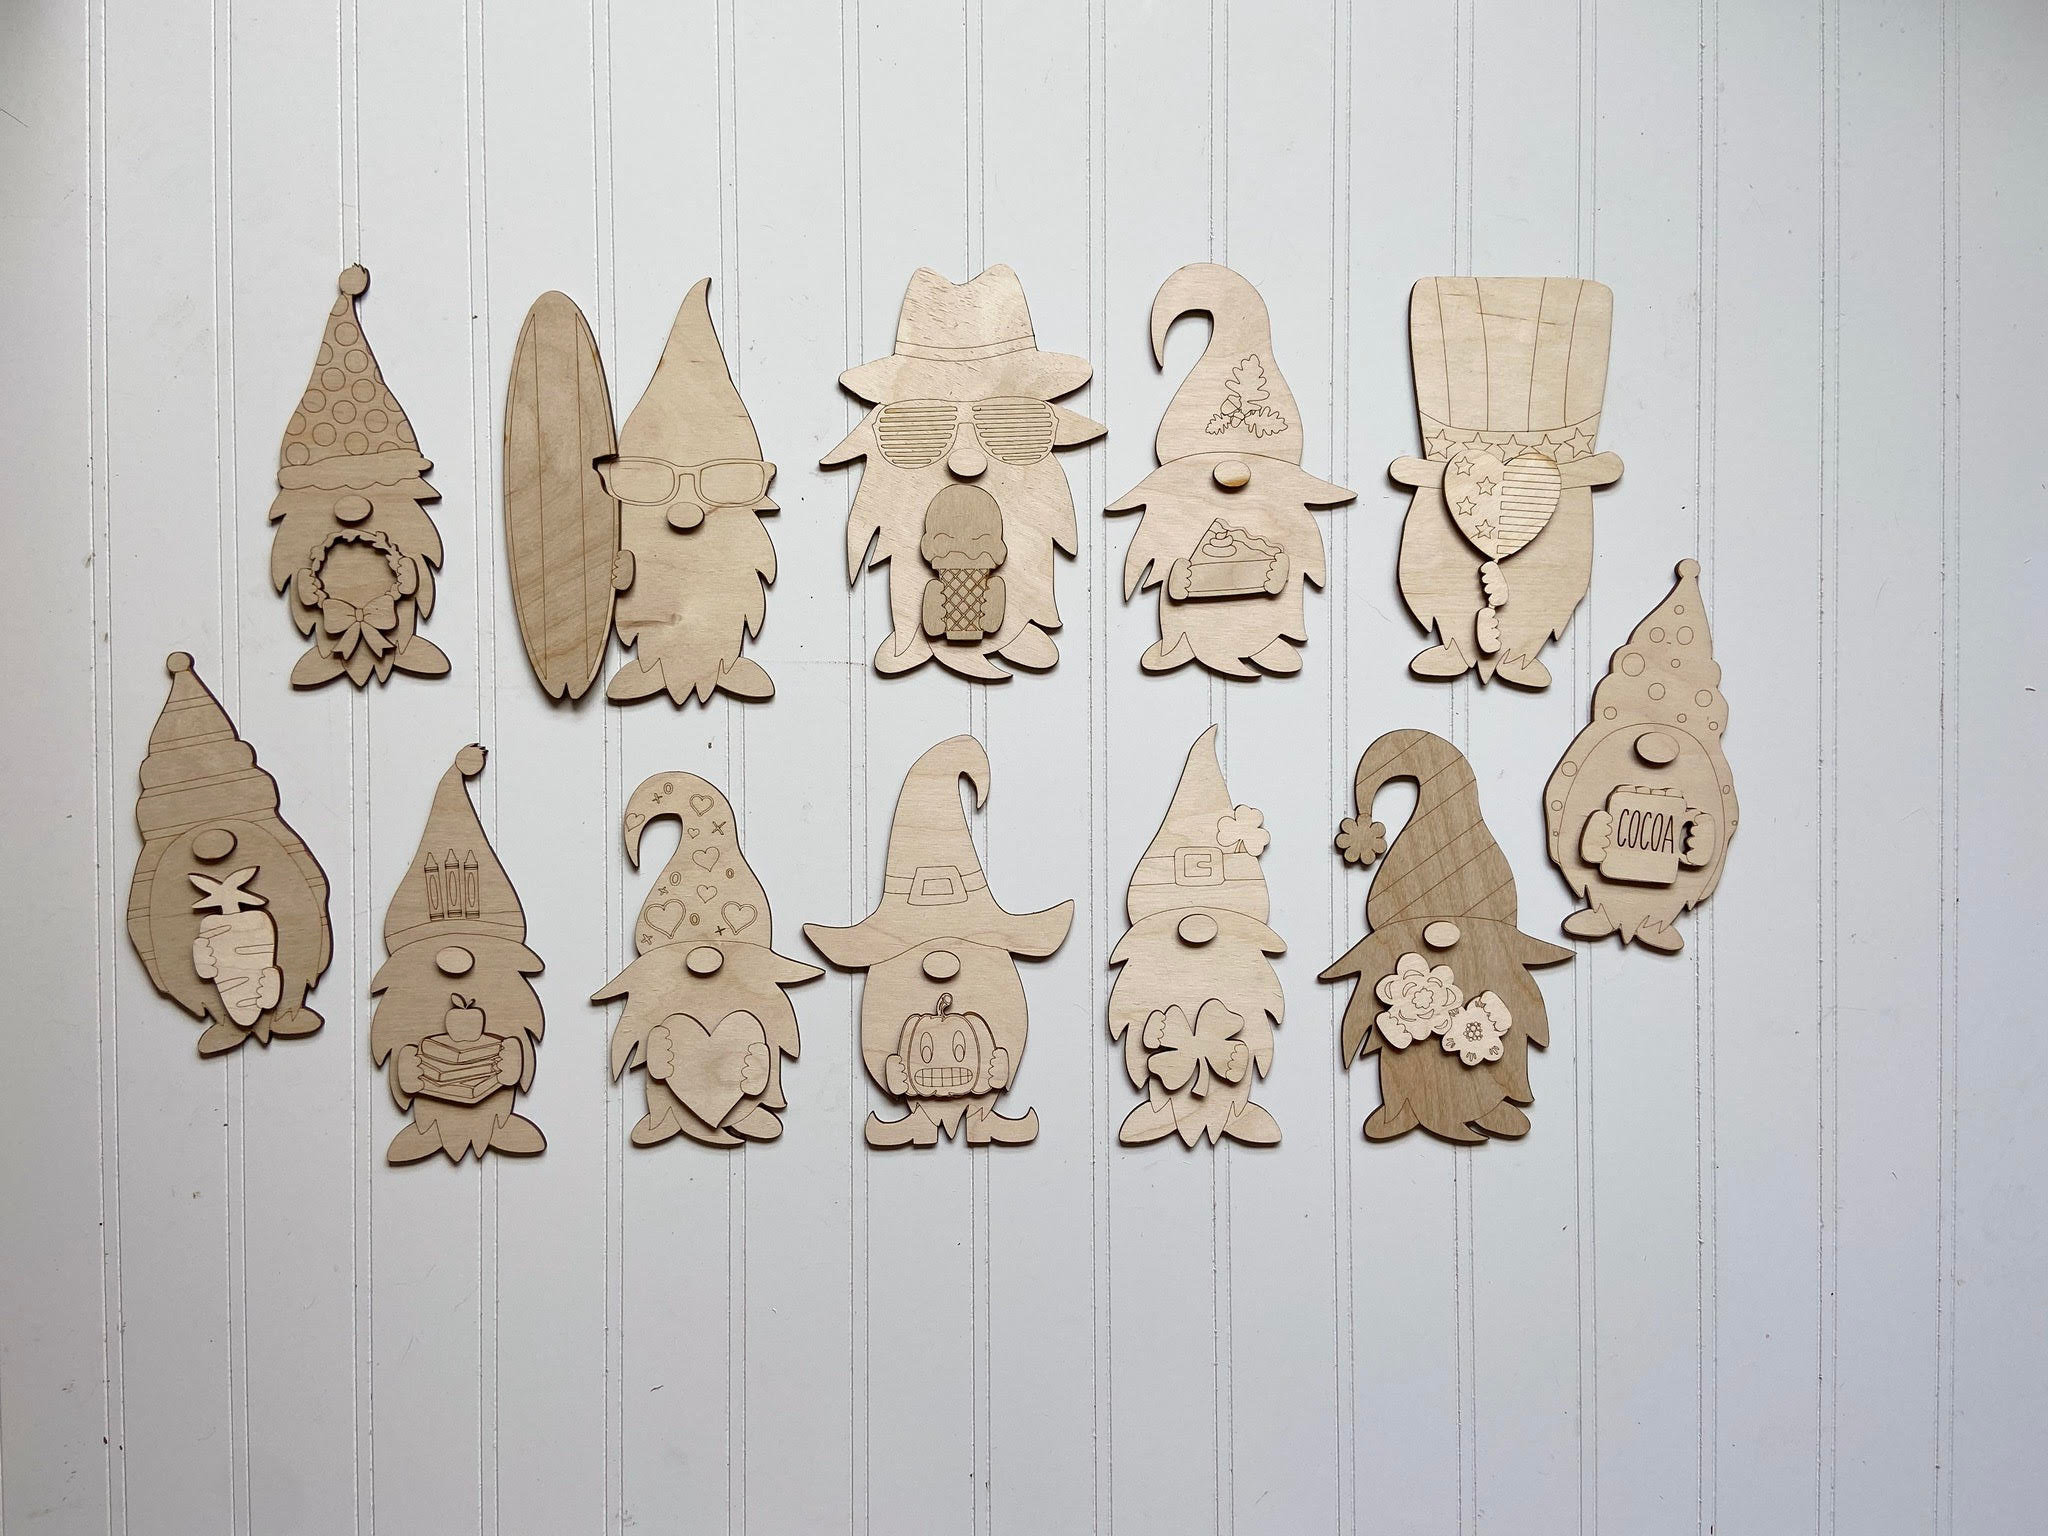 diy-gnome-craft-interchangeable-wood-shapes-blanks-etsy